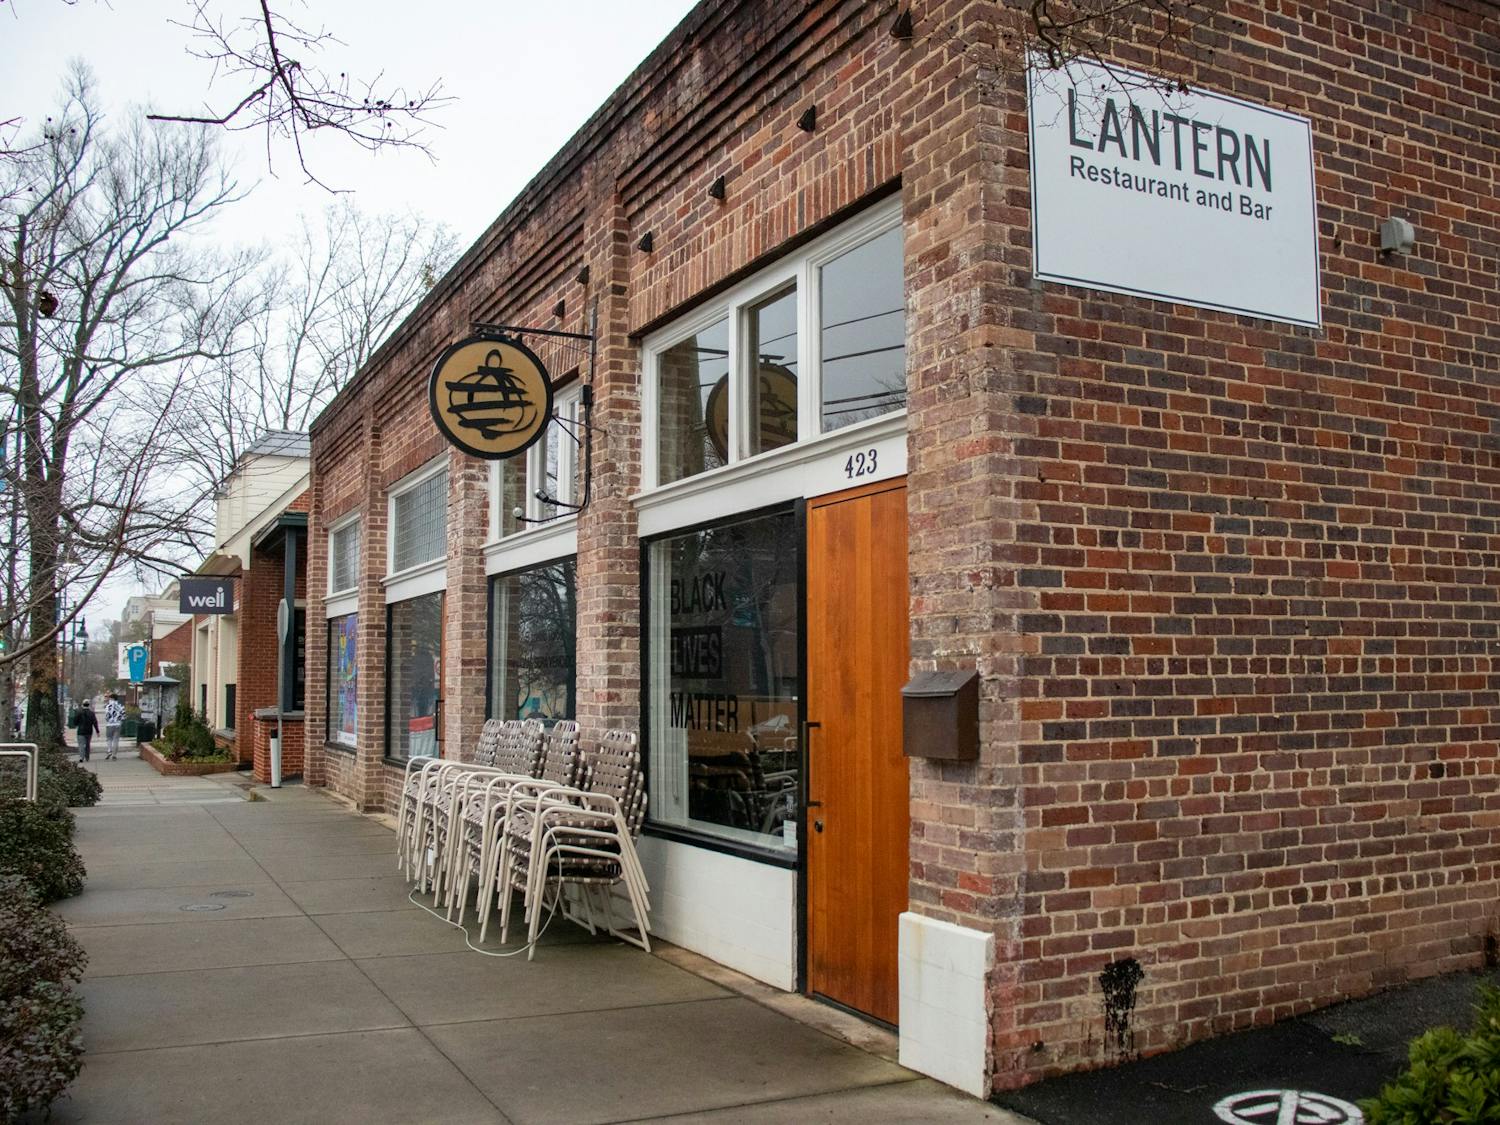 Lantern stands on Franklin Street on Jan. 26, 2021. Lantern is a Chapel Hill restaurant that is participating in triangle restaurant week.